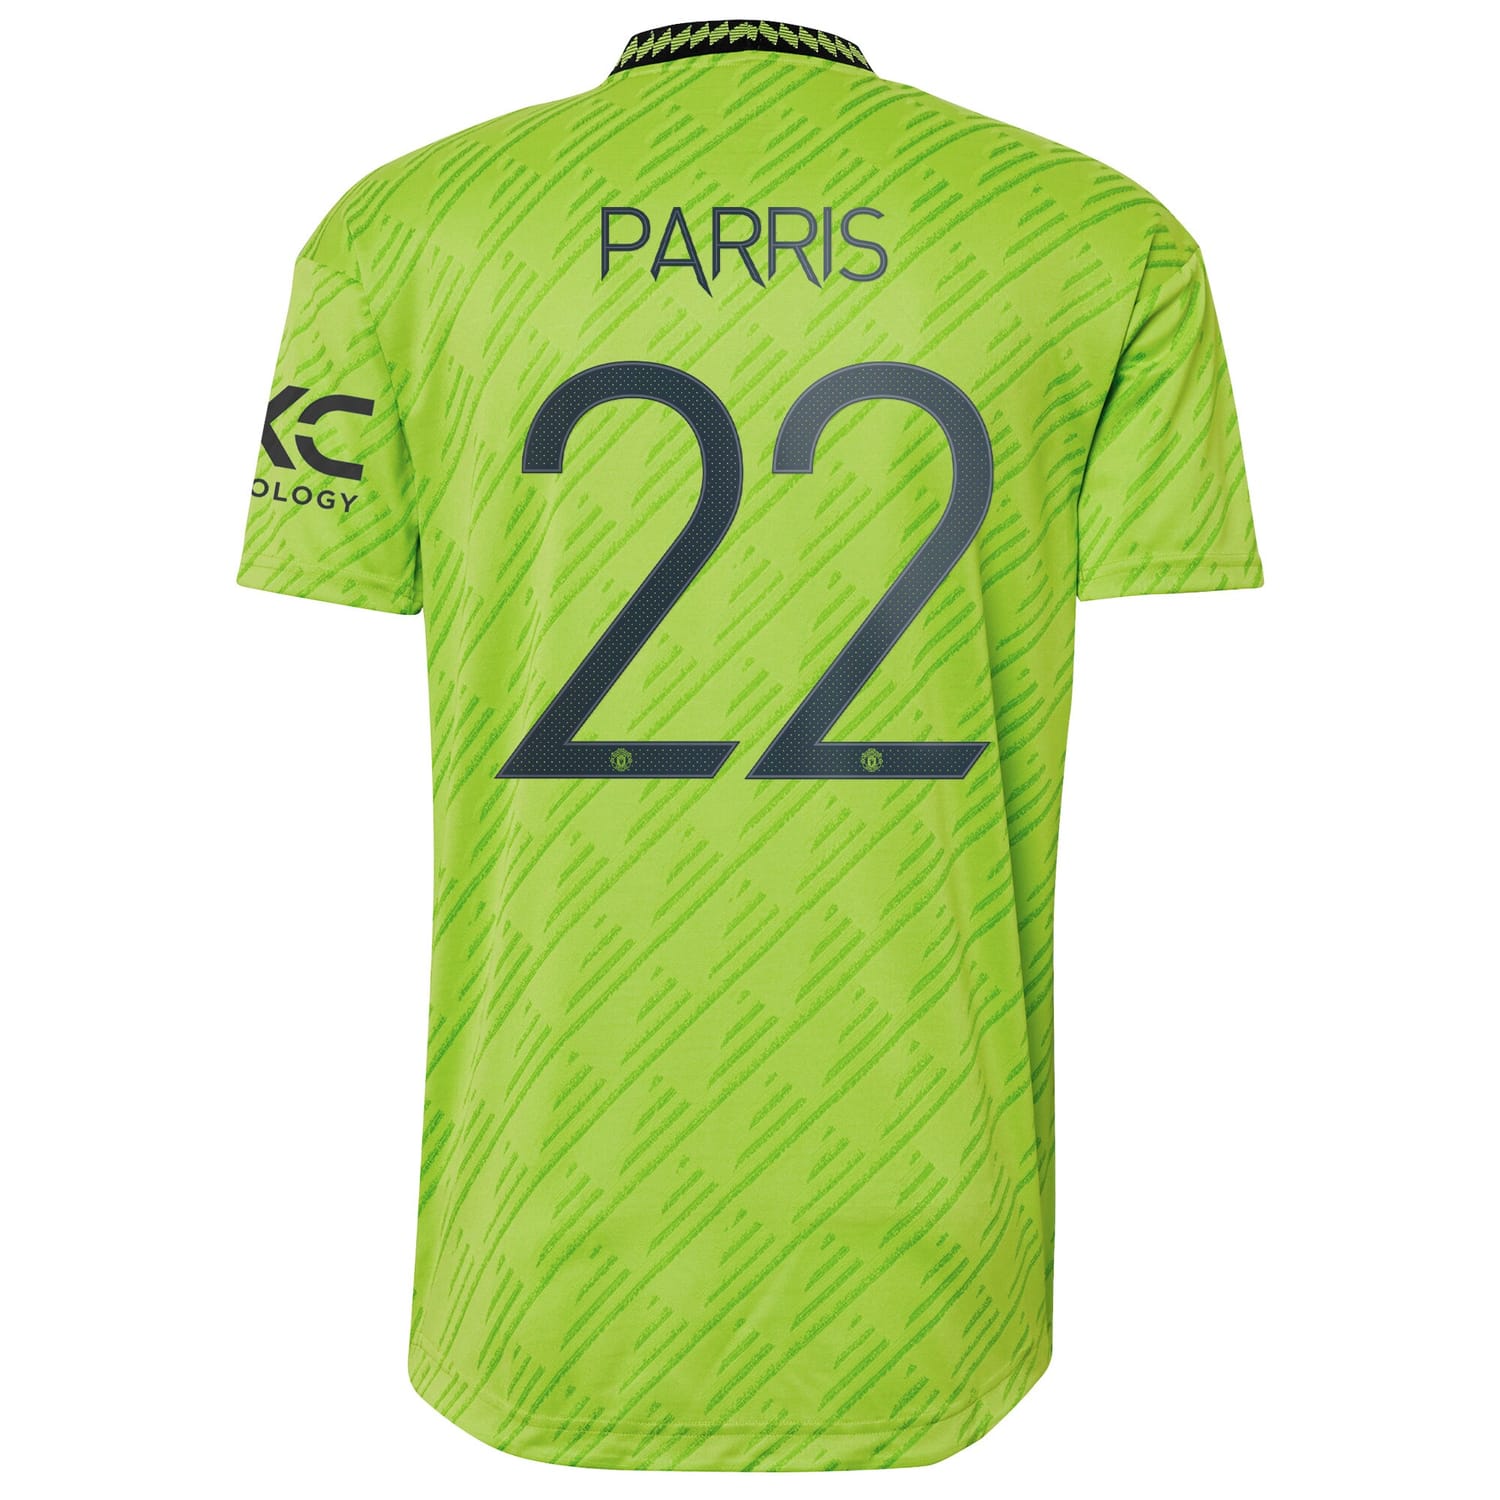 Premier League Manchester United Third Cup Authentic Jersey Shirt 2022-23 player Nikita Parris 22 printing for Men